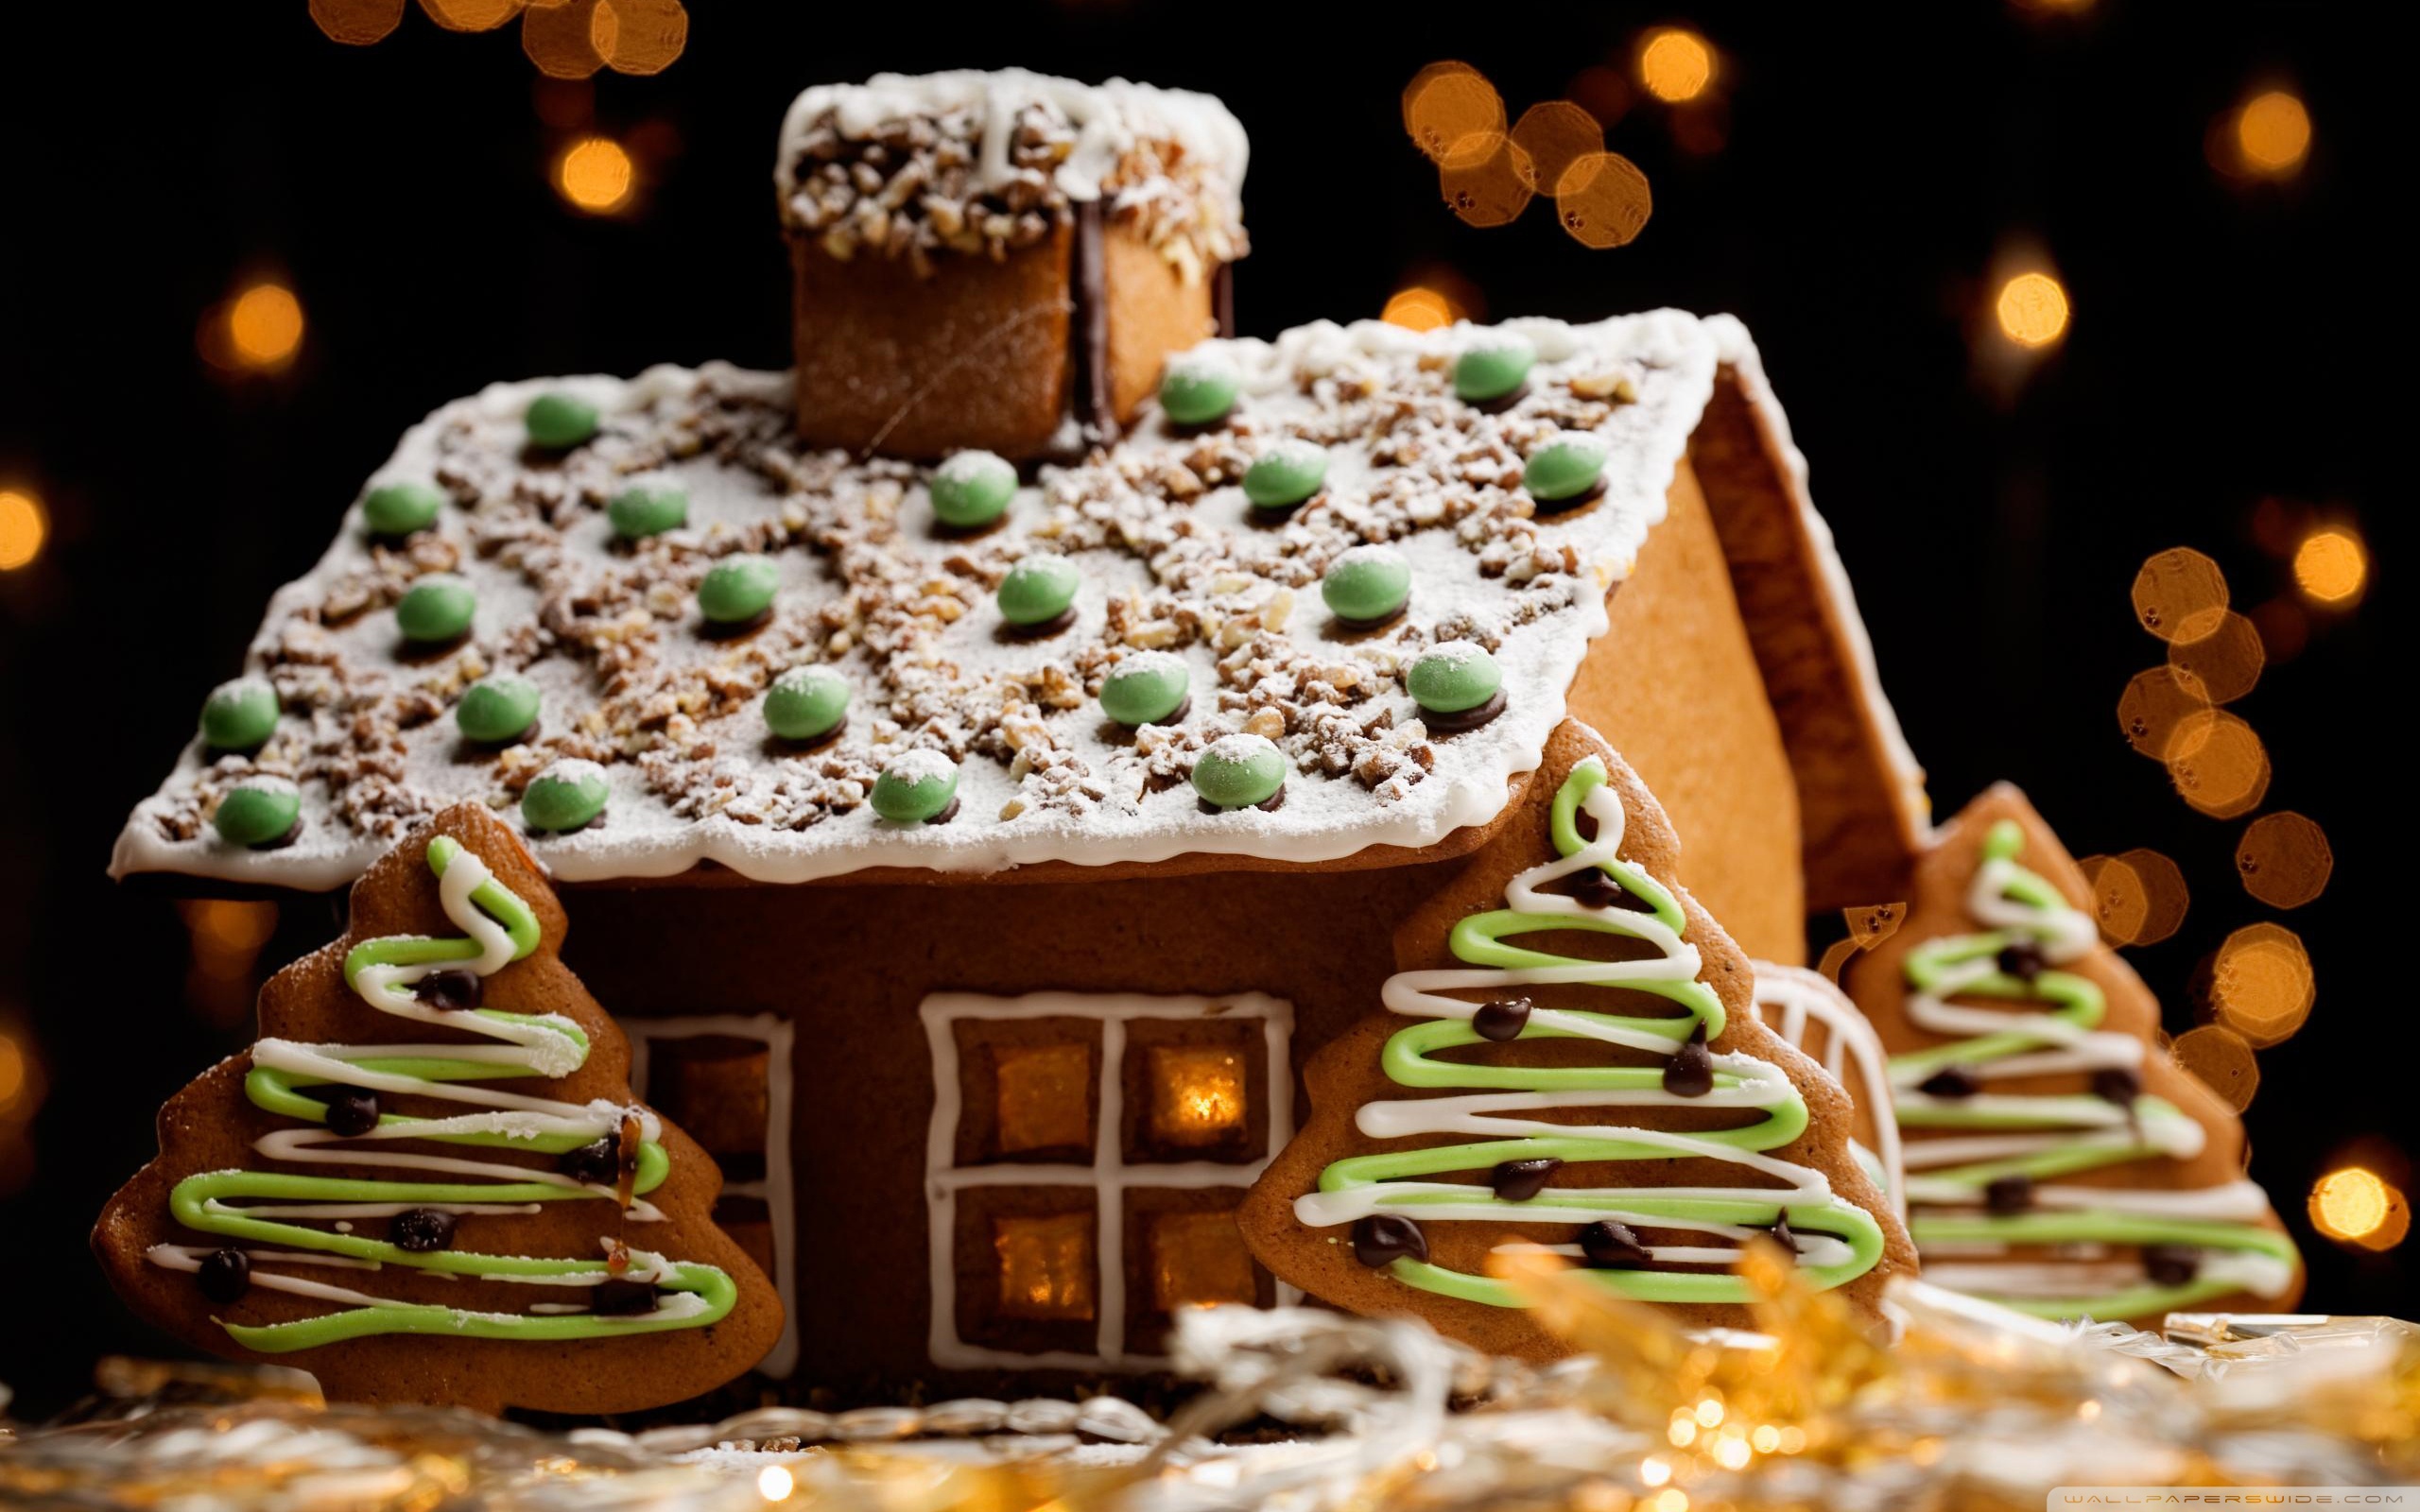 Gingerbread House Wallpaper On